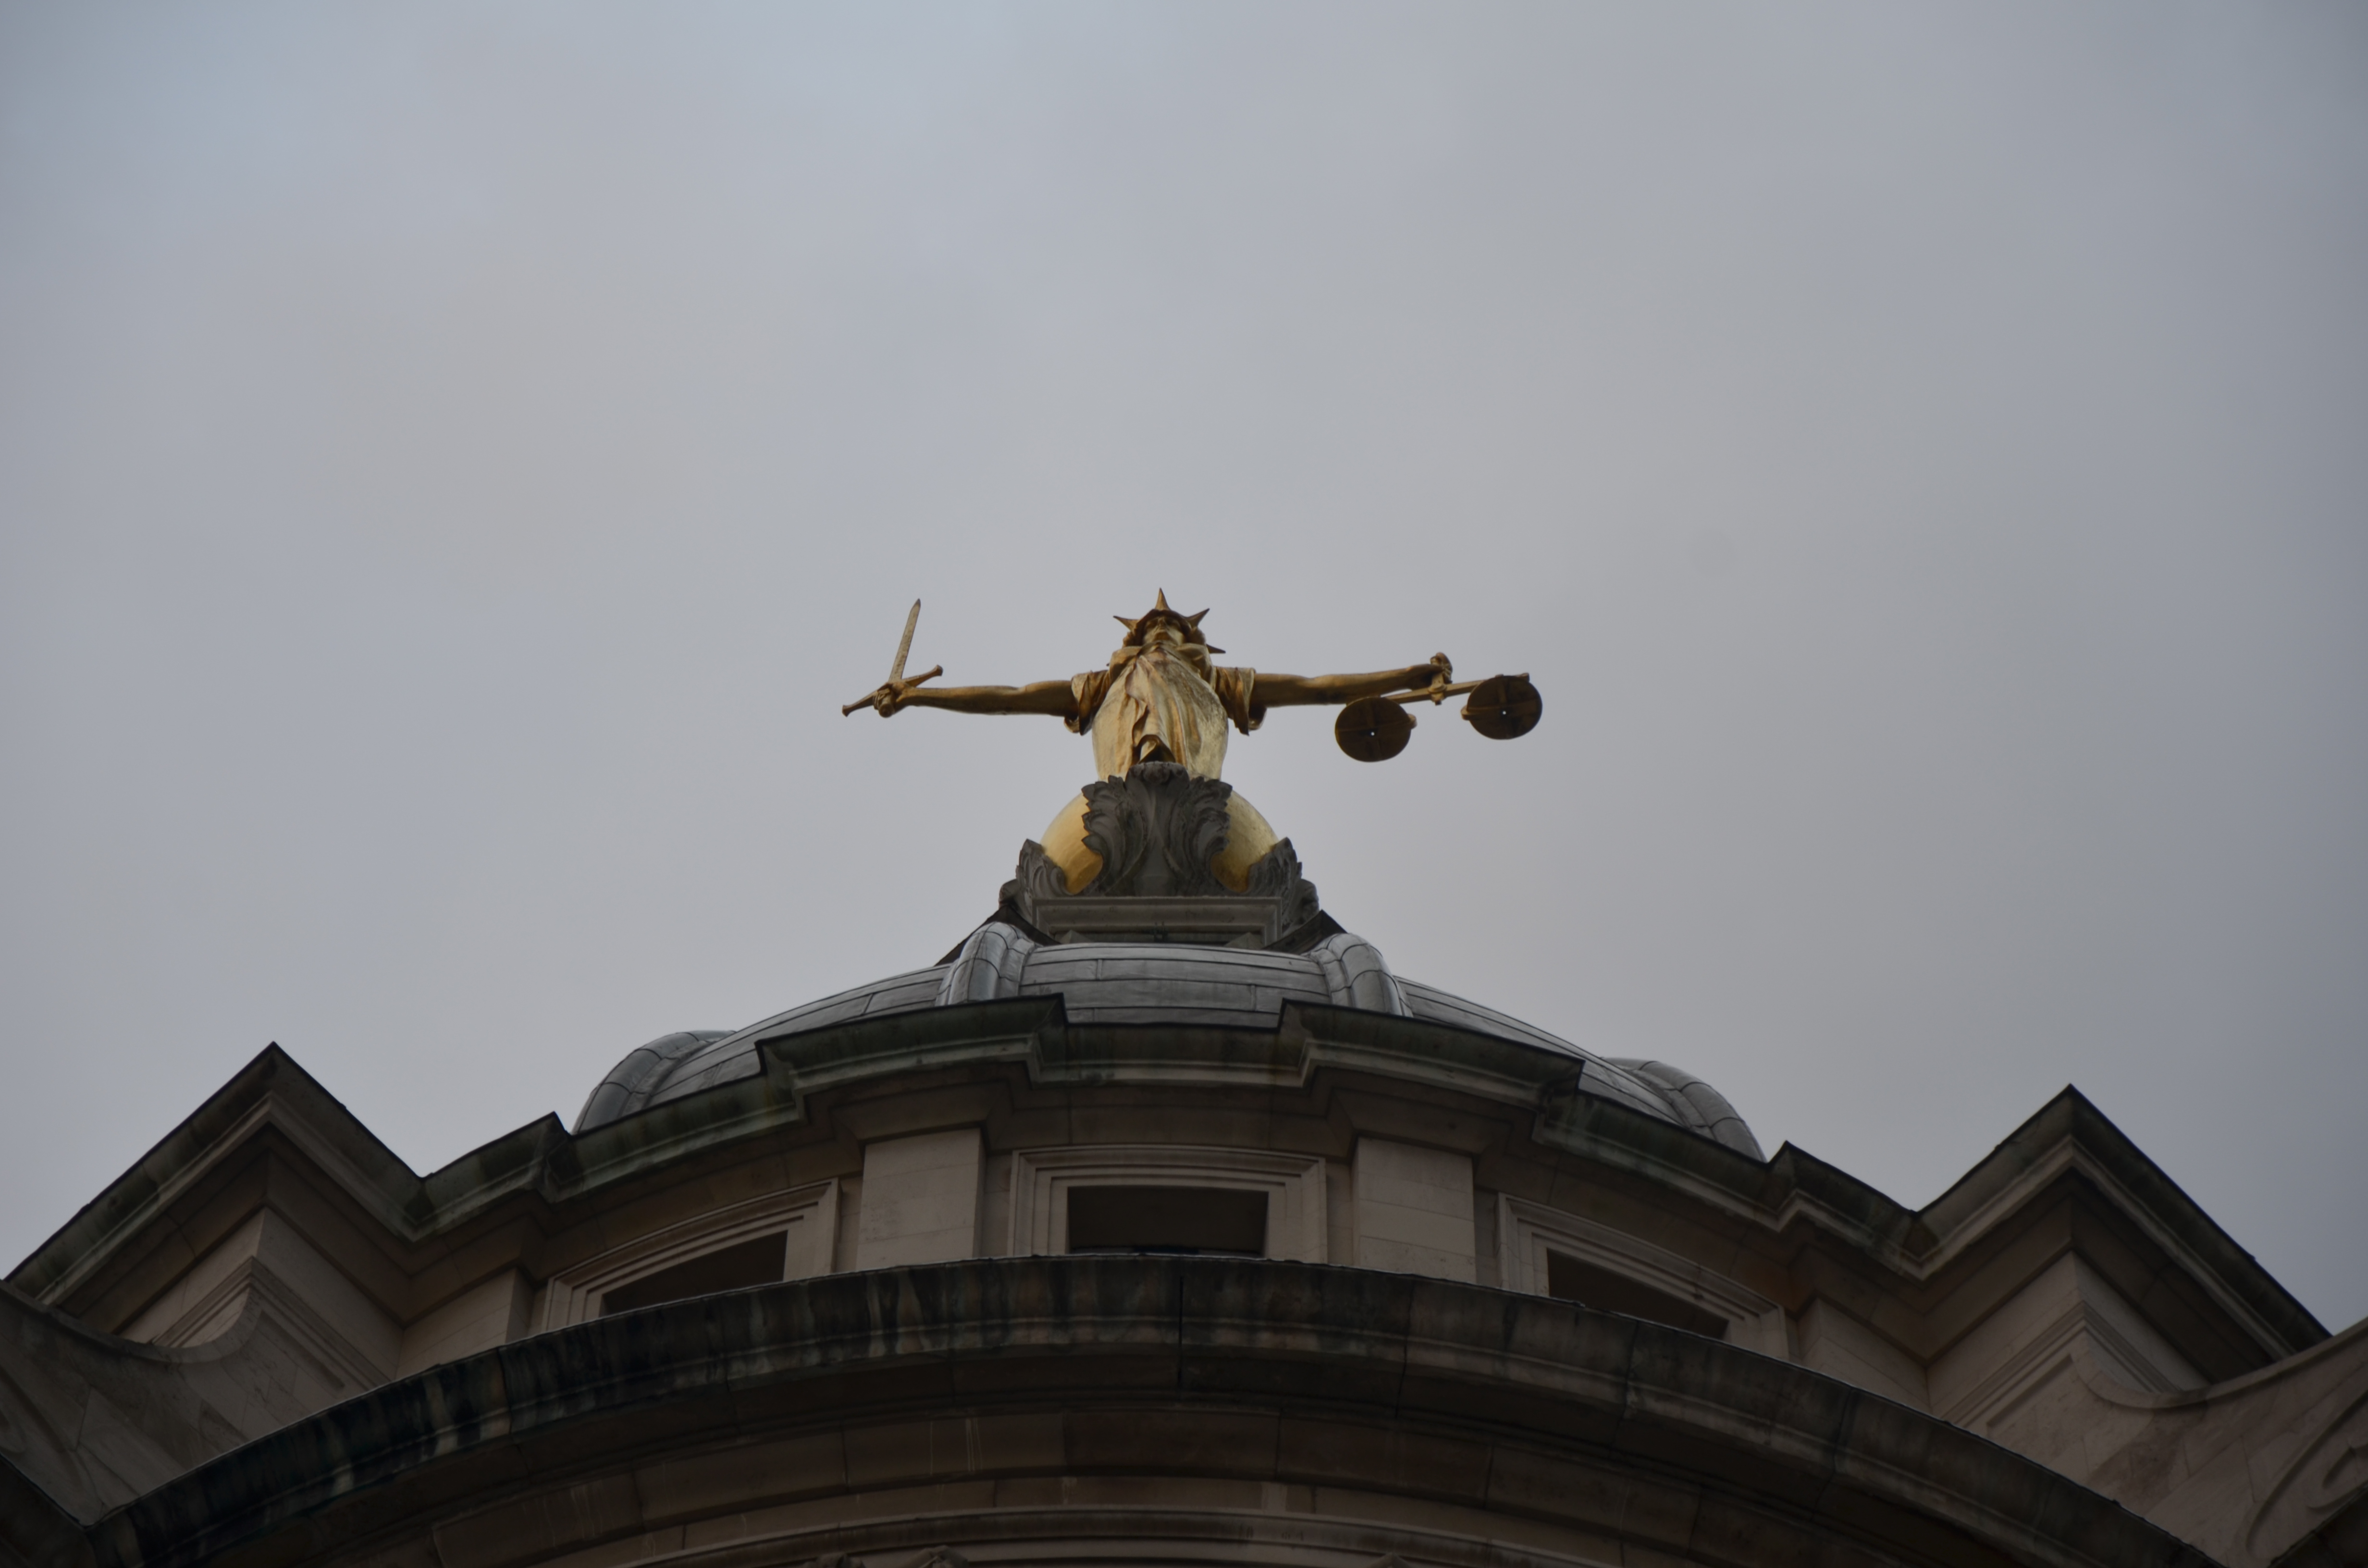 Justice atop the Old Bailey, London by Ben Sutherland